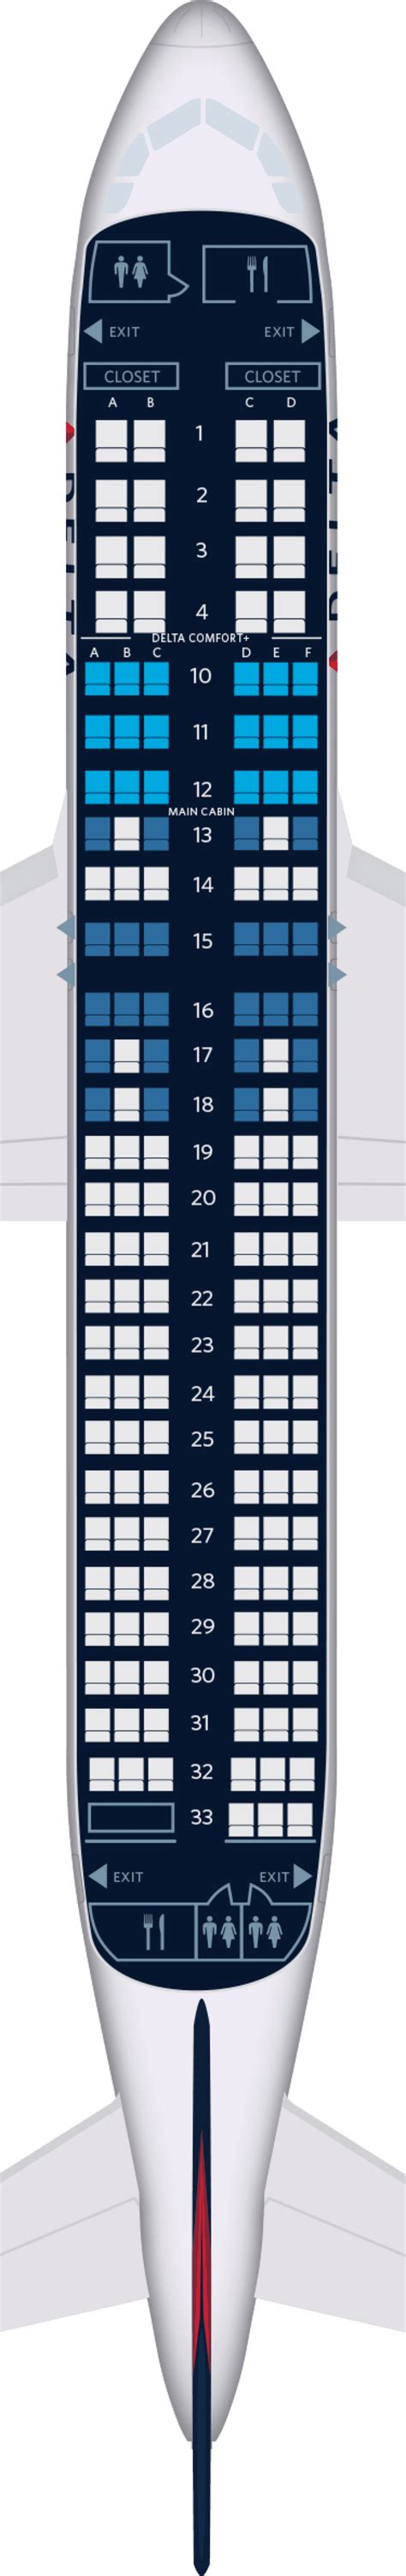 Airbus A3 20 Seating Chart